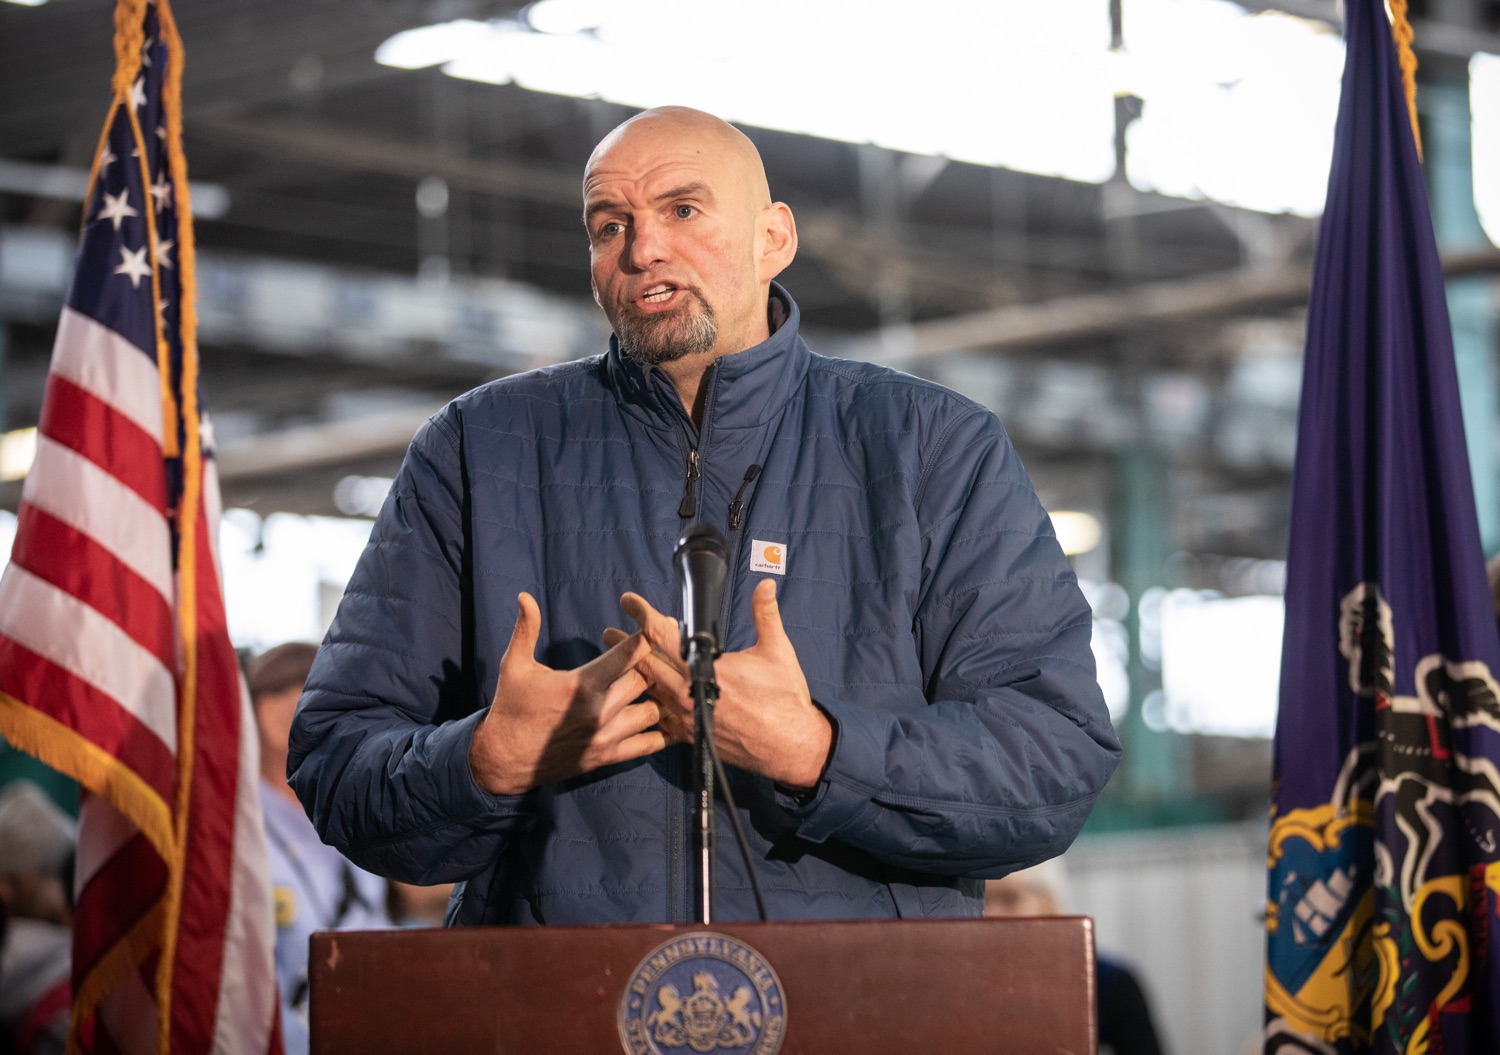 Lt. Governor John Fetterman speaking at the Pennsylvania Farm Show butter sculpture unveiling.Lt. Governor John Fetterman and Secretary of Agriculture Russell Redding today unveiled the 2020 Pennsylvania Farm Show butter sculpture, carved from a half-ton of butter depicting three of Pennsylvanias beloved professional sports mascots: Philadelphia Flyers Gritty, Philadelphia Eagles Swoop, and Pittsburgh Steelers Steely McBeam celebrating with a spread of Pennsylvania dairy products. The sculpture, a long-time Farm Show staple, encourages Pennsylvanians to be a fan of Pennsylvania dairy and give a cheer to the more than 6,200 dairy farmers in the commonwealth.  Harrisburg, PA  January 2, 2020<br><a href="https://filesource.amperwave.net/commonwealthofpa/photo/17646_agric_butter_sculpture_dz_016.jpg" target="_blank">⇣ Download Photo</a>